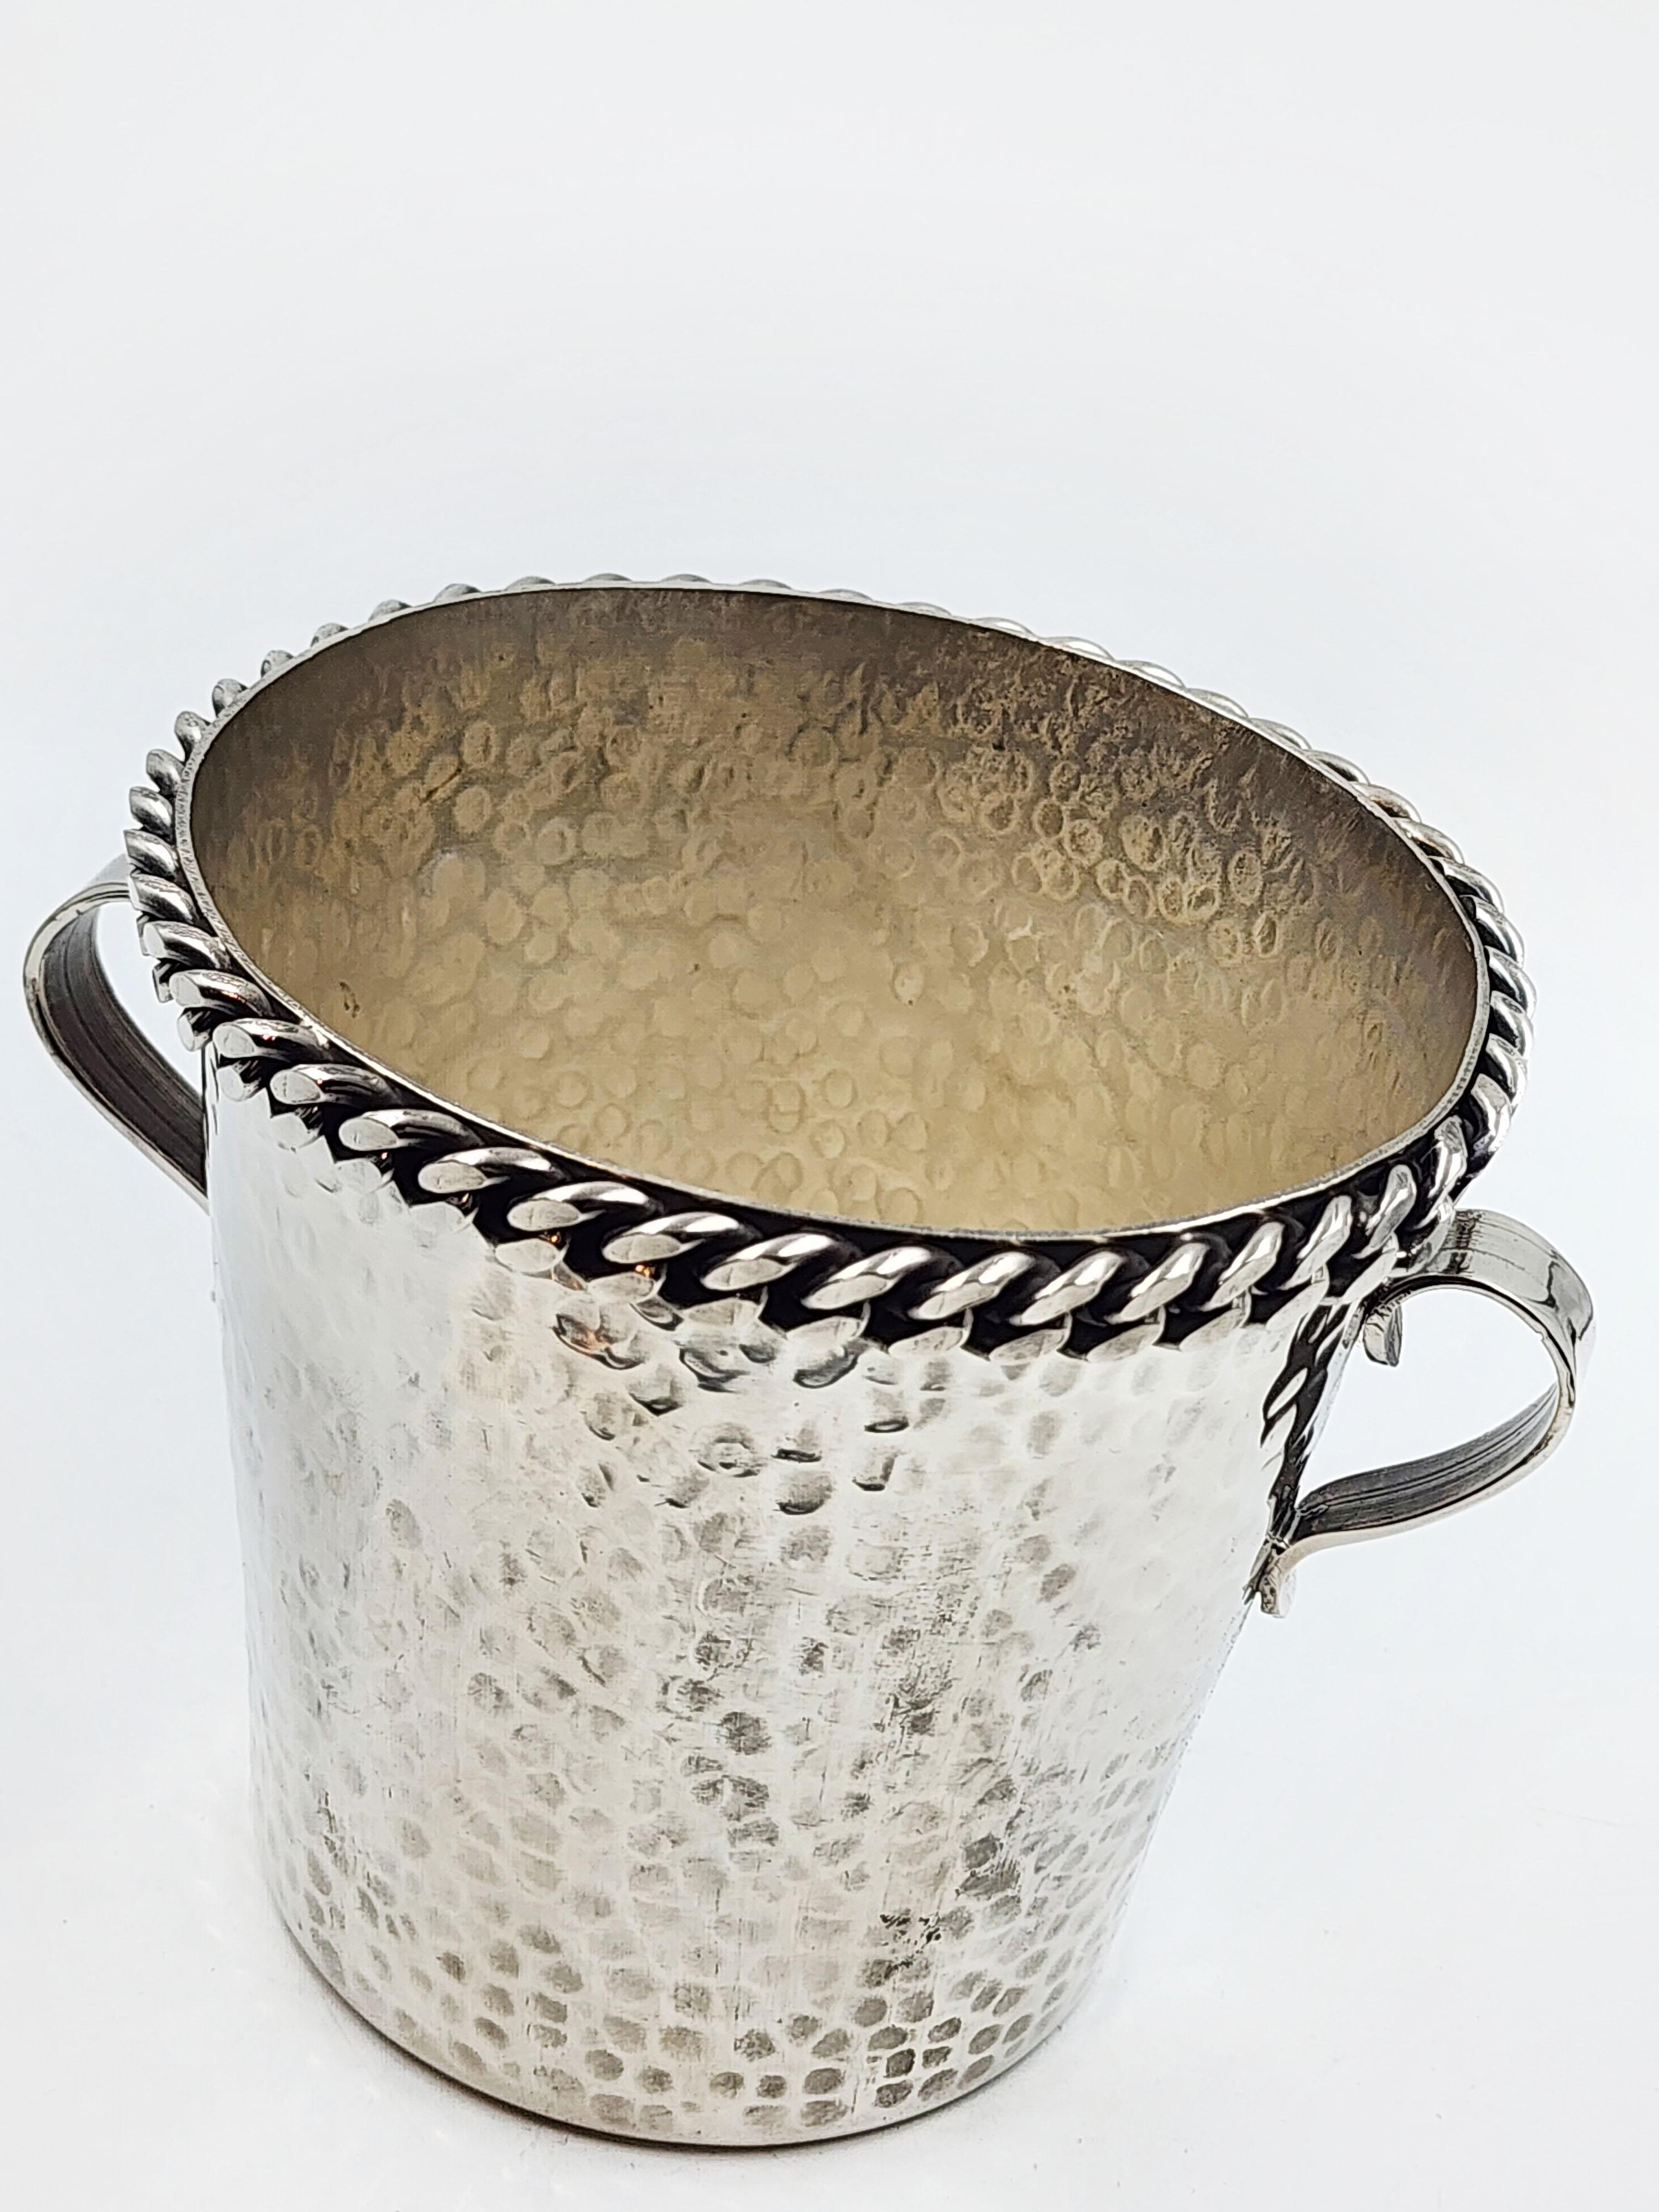 Art Deco Cooler in Silver Metal by Jean Despres
Elegant Jean Despres cooler in silver metal with chain design on the edge and textured martele, signed on the bottom.
Measures:
Height: 11 centimeters
Diameter: 12 centimeters